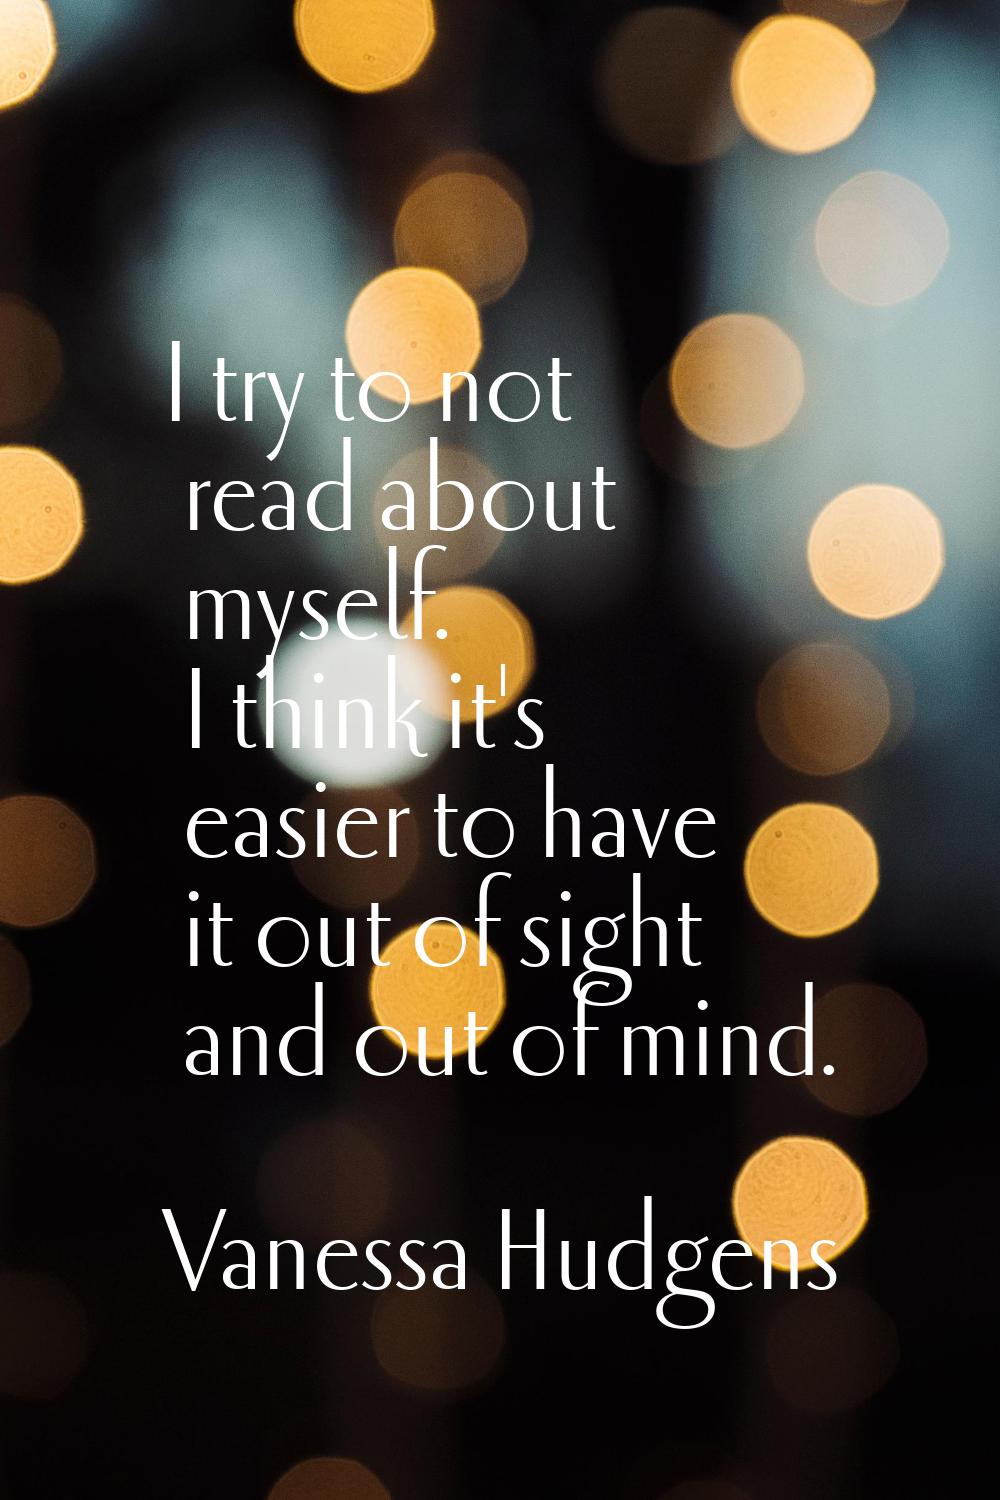 I try to not read about myself. I think it's easier to have it out of sight and out of mind.